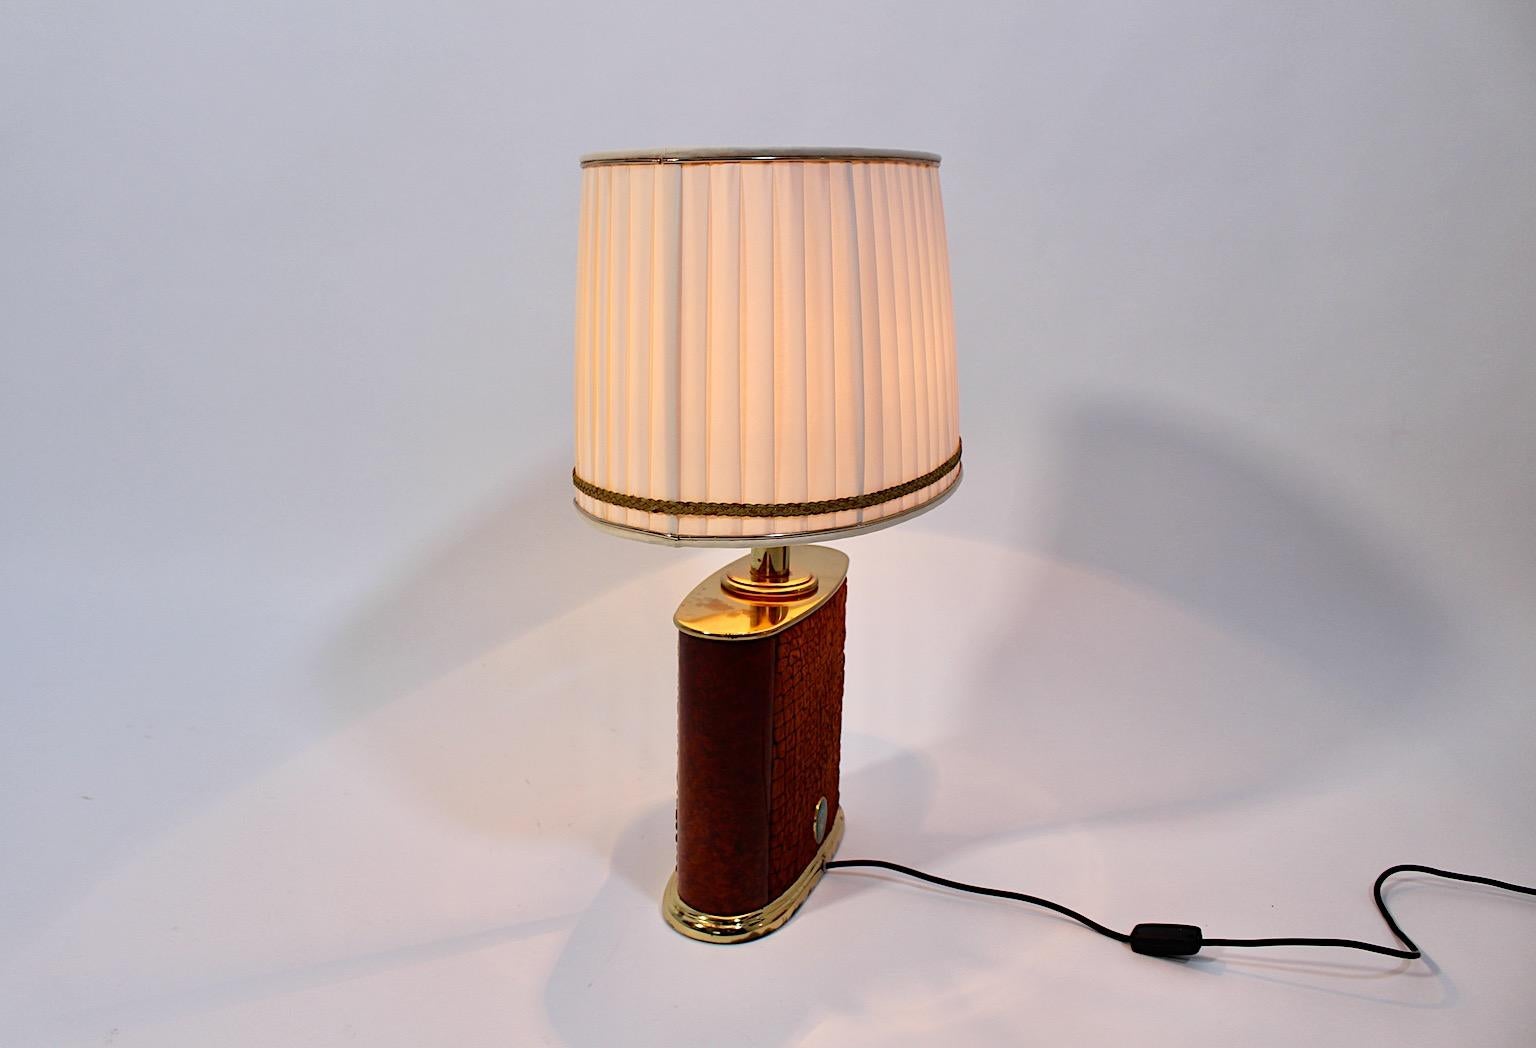 20th Century Mid Century Modern Vintage Table Lamp Brass Brown Suede Paolo Gucci 1960s Italy For Sale